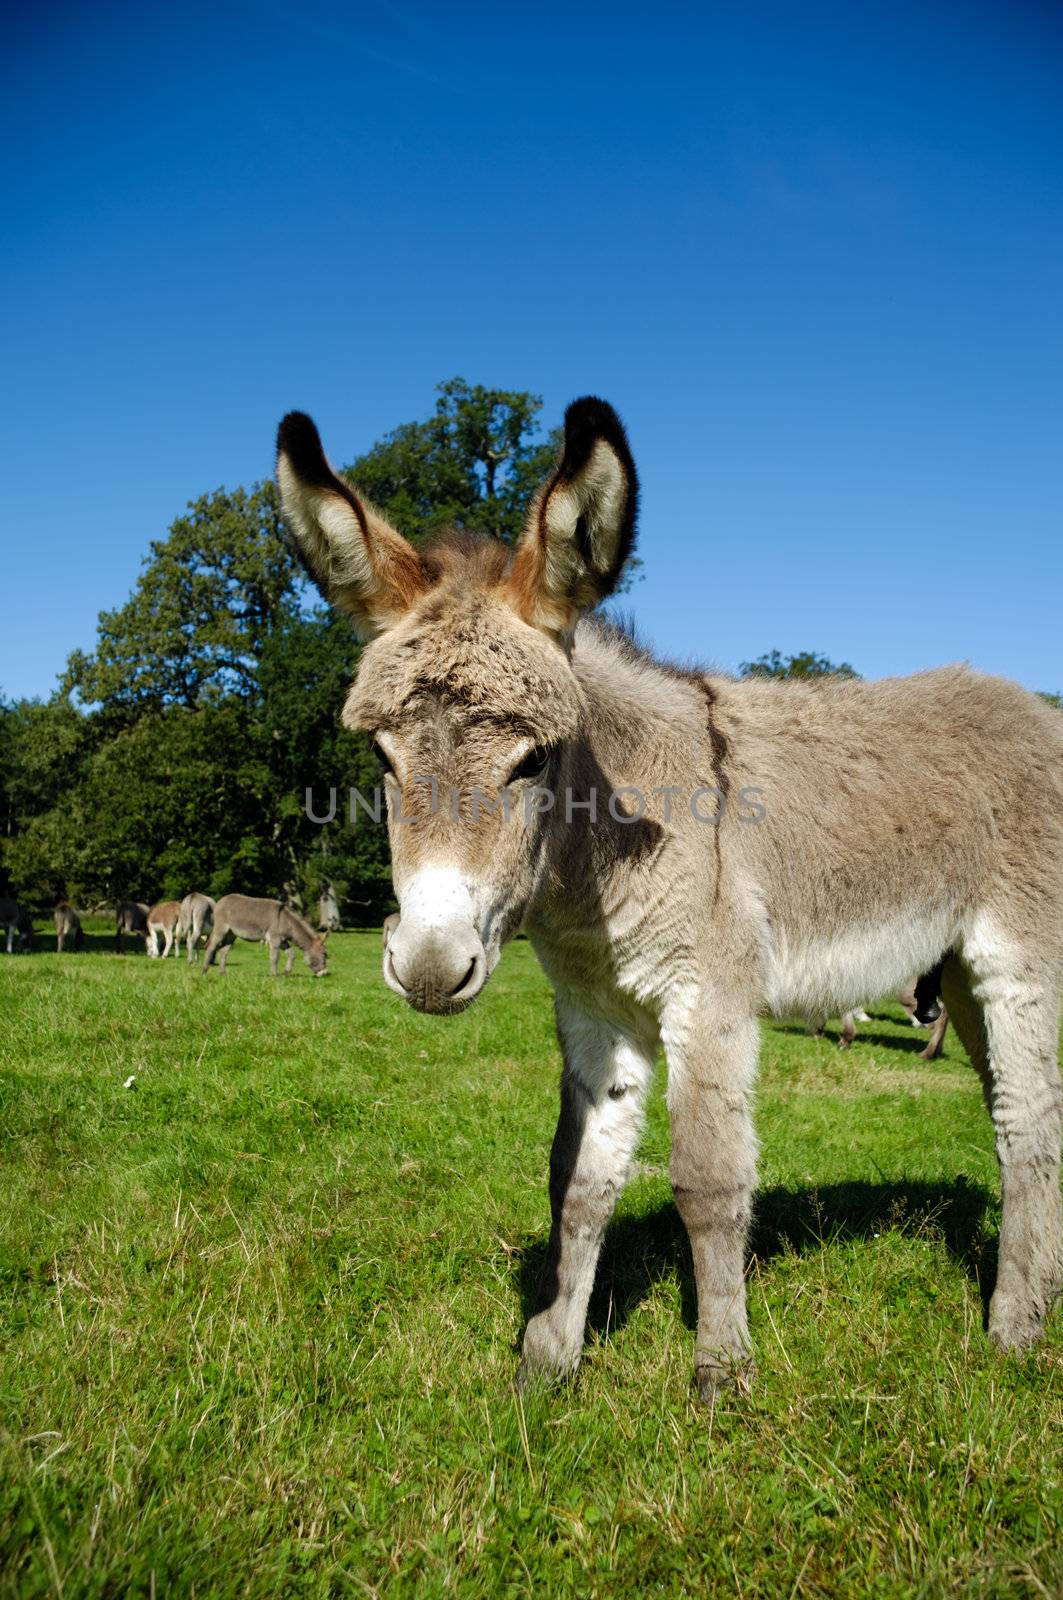 A sweet donkey foal is standing on green grass
